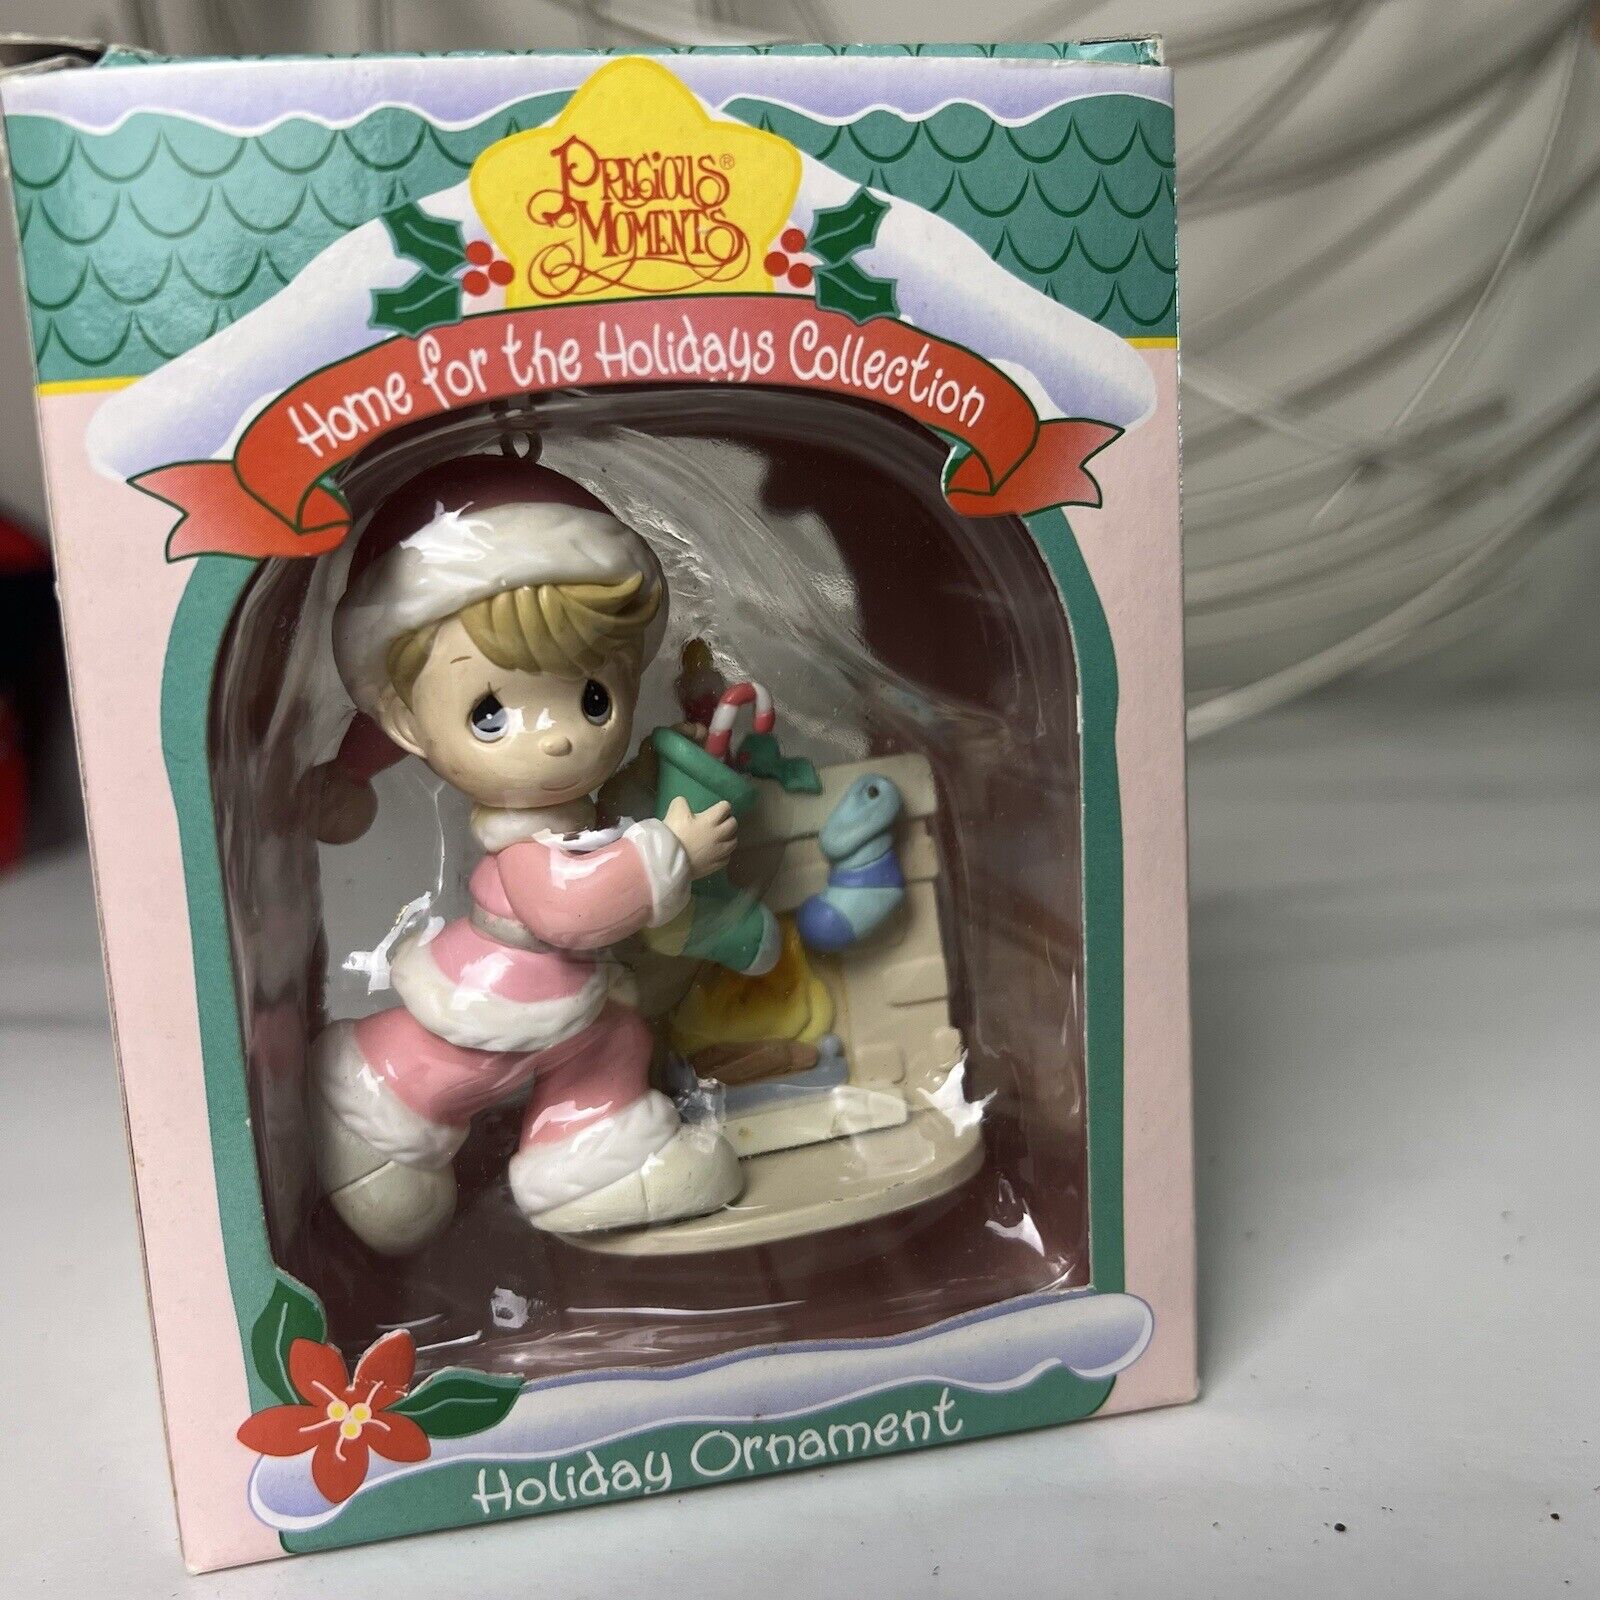 VINTAGE Precious Moments Ornament Home For The Holidays Collection Christmas